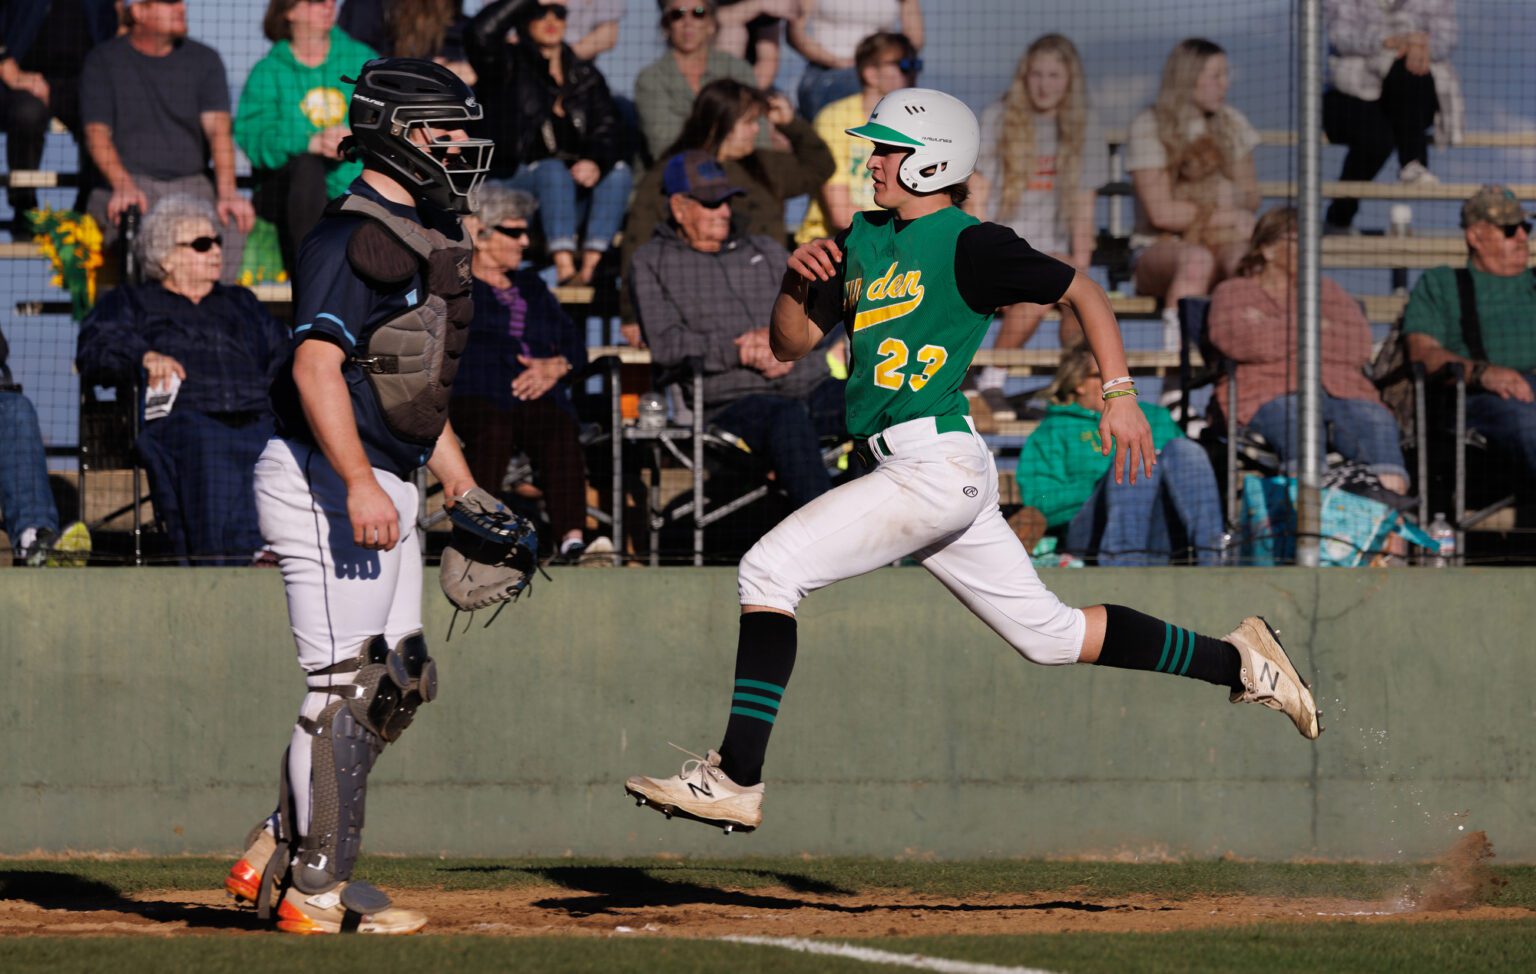 Lynden’s Brody Price leaps for the home plate as he scores a run Tuesday, March 19 during the Lions' 4-2 win over Lynden Christian at Lynden High School.